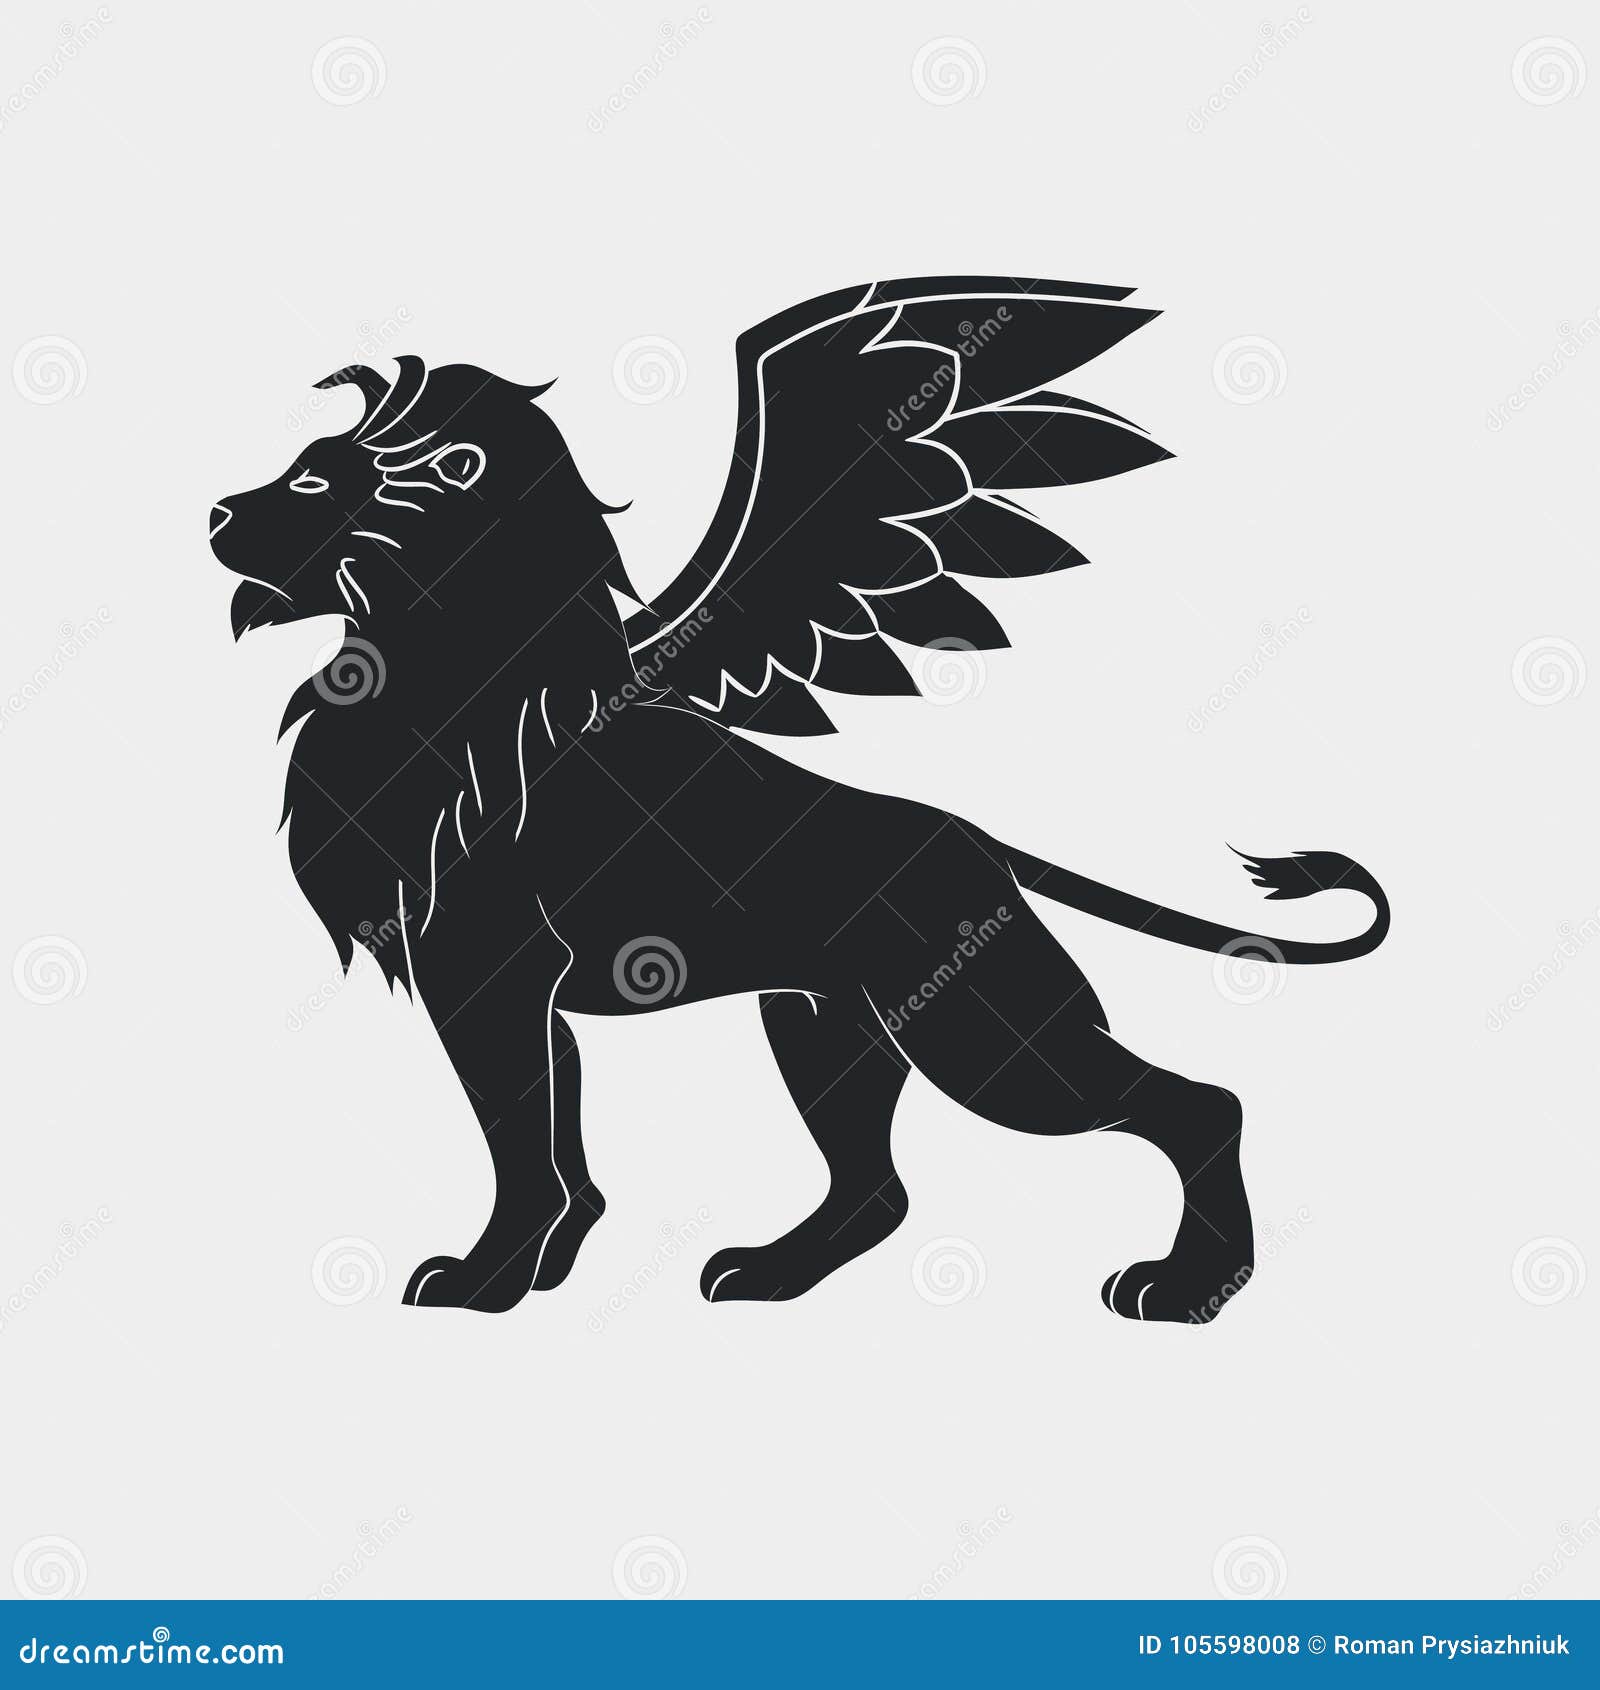 lion with wings icon. winged leo, logo template. .